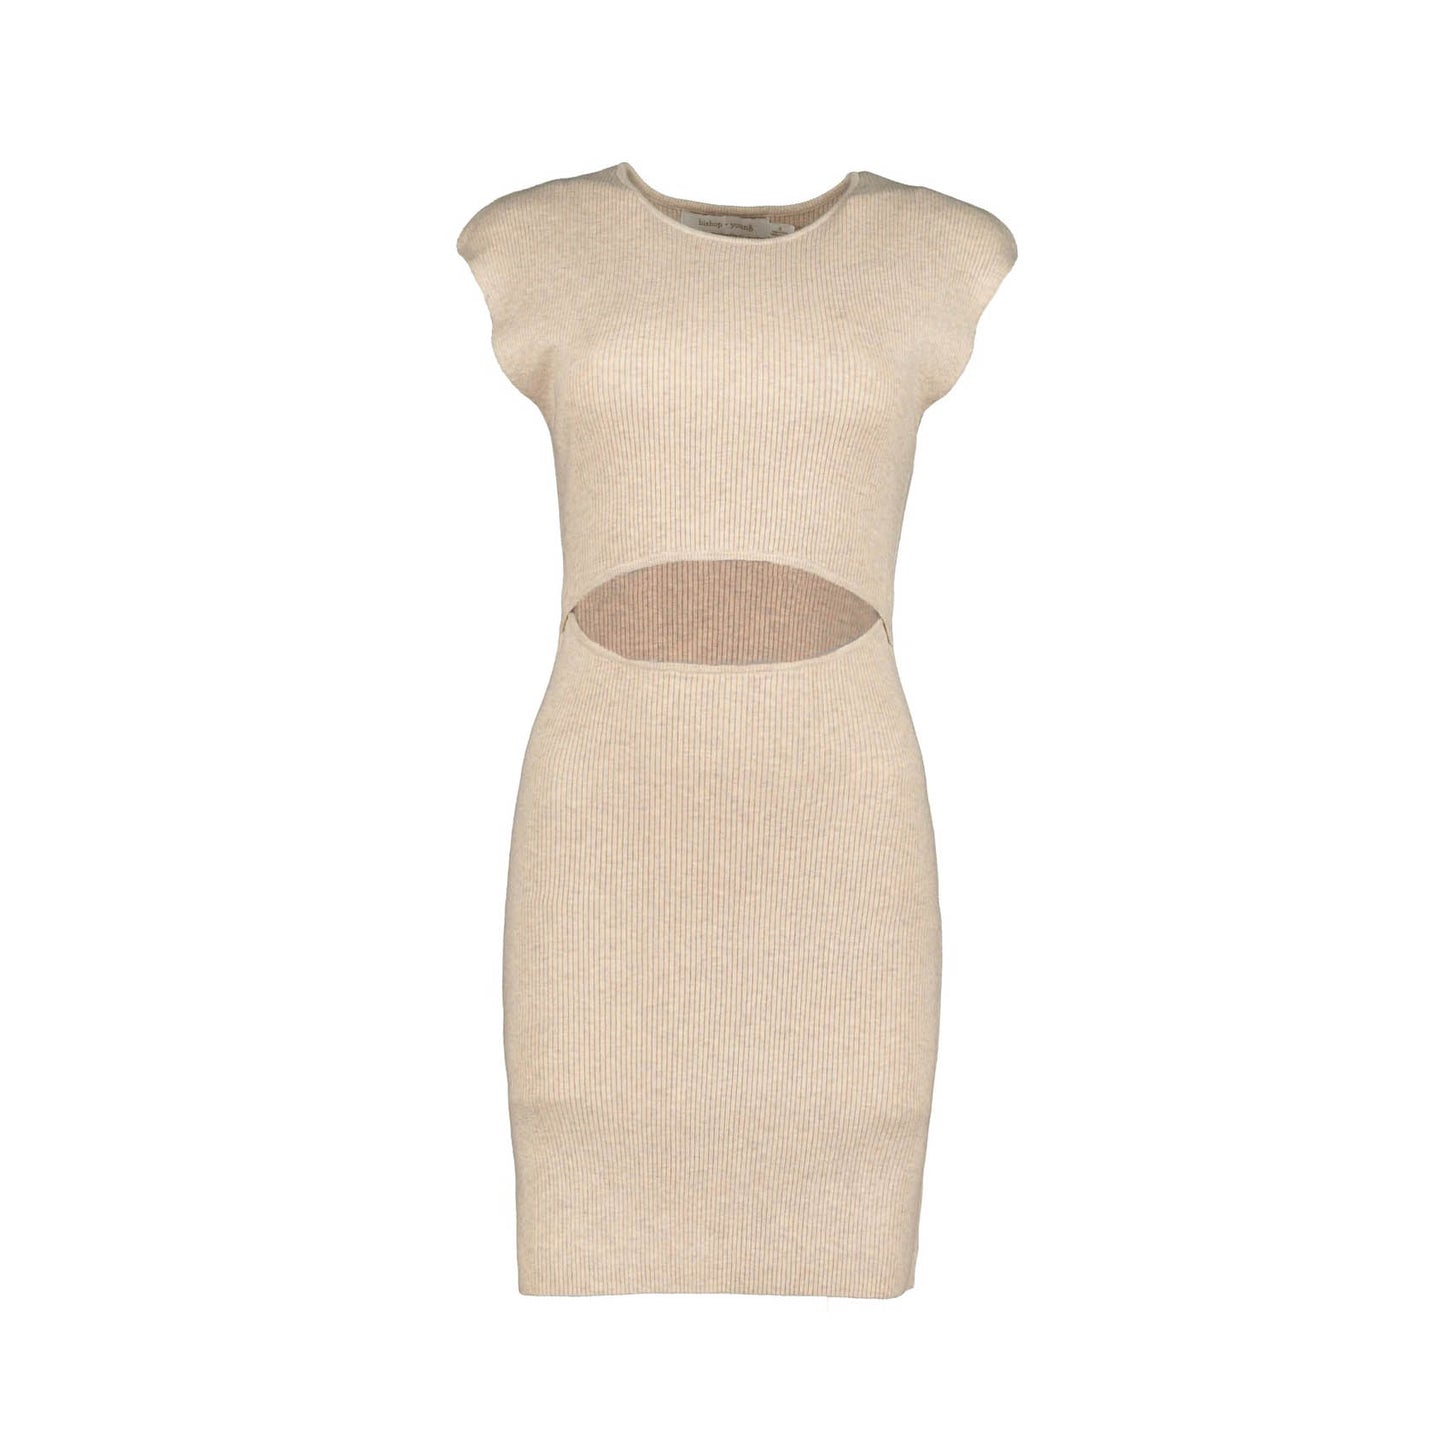 Bishop + Young, Selene Cut Out Dress